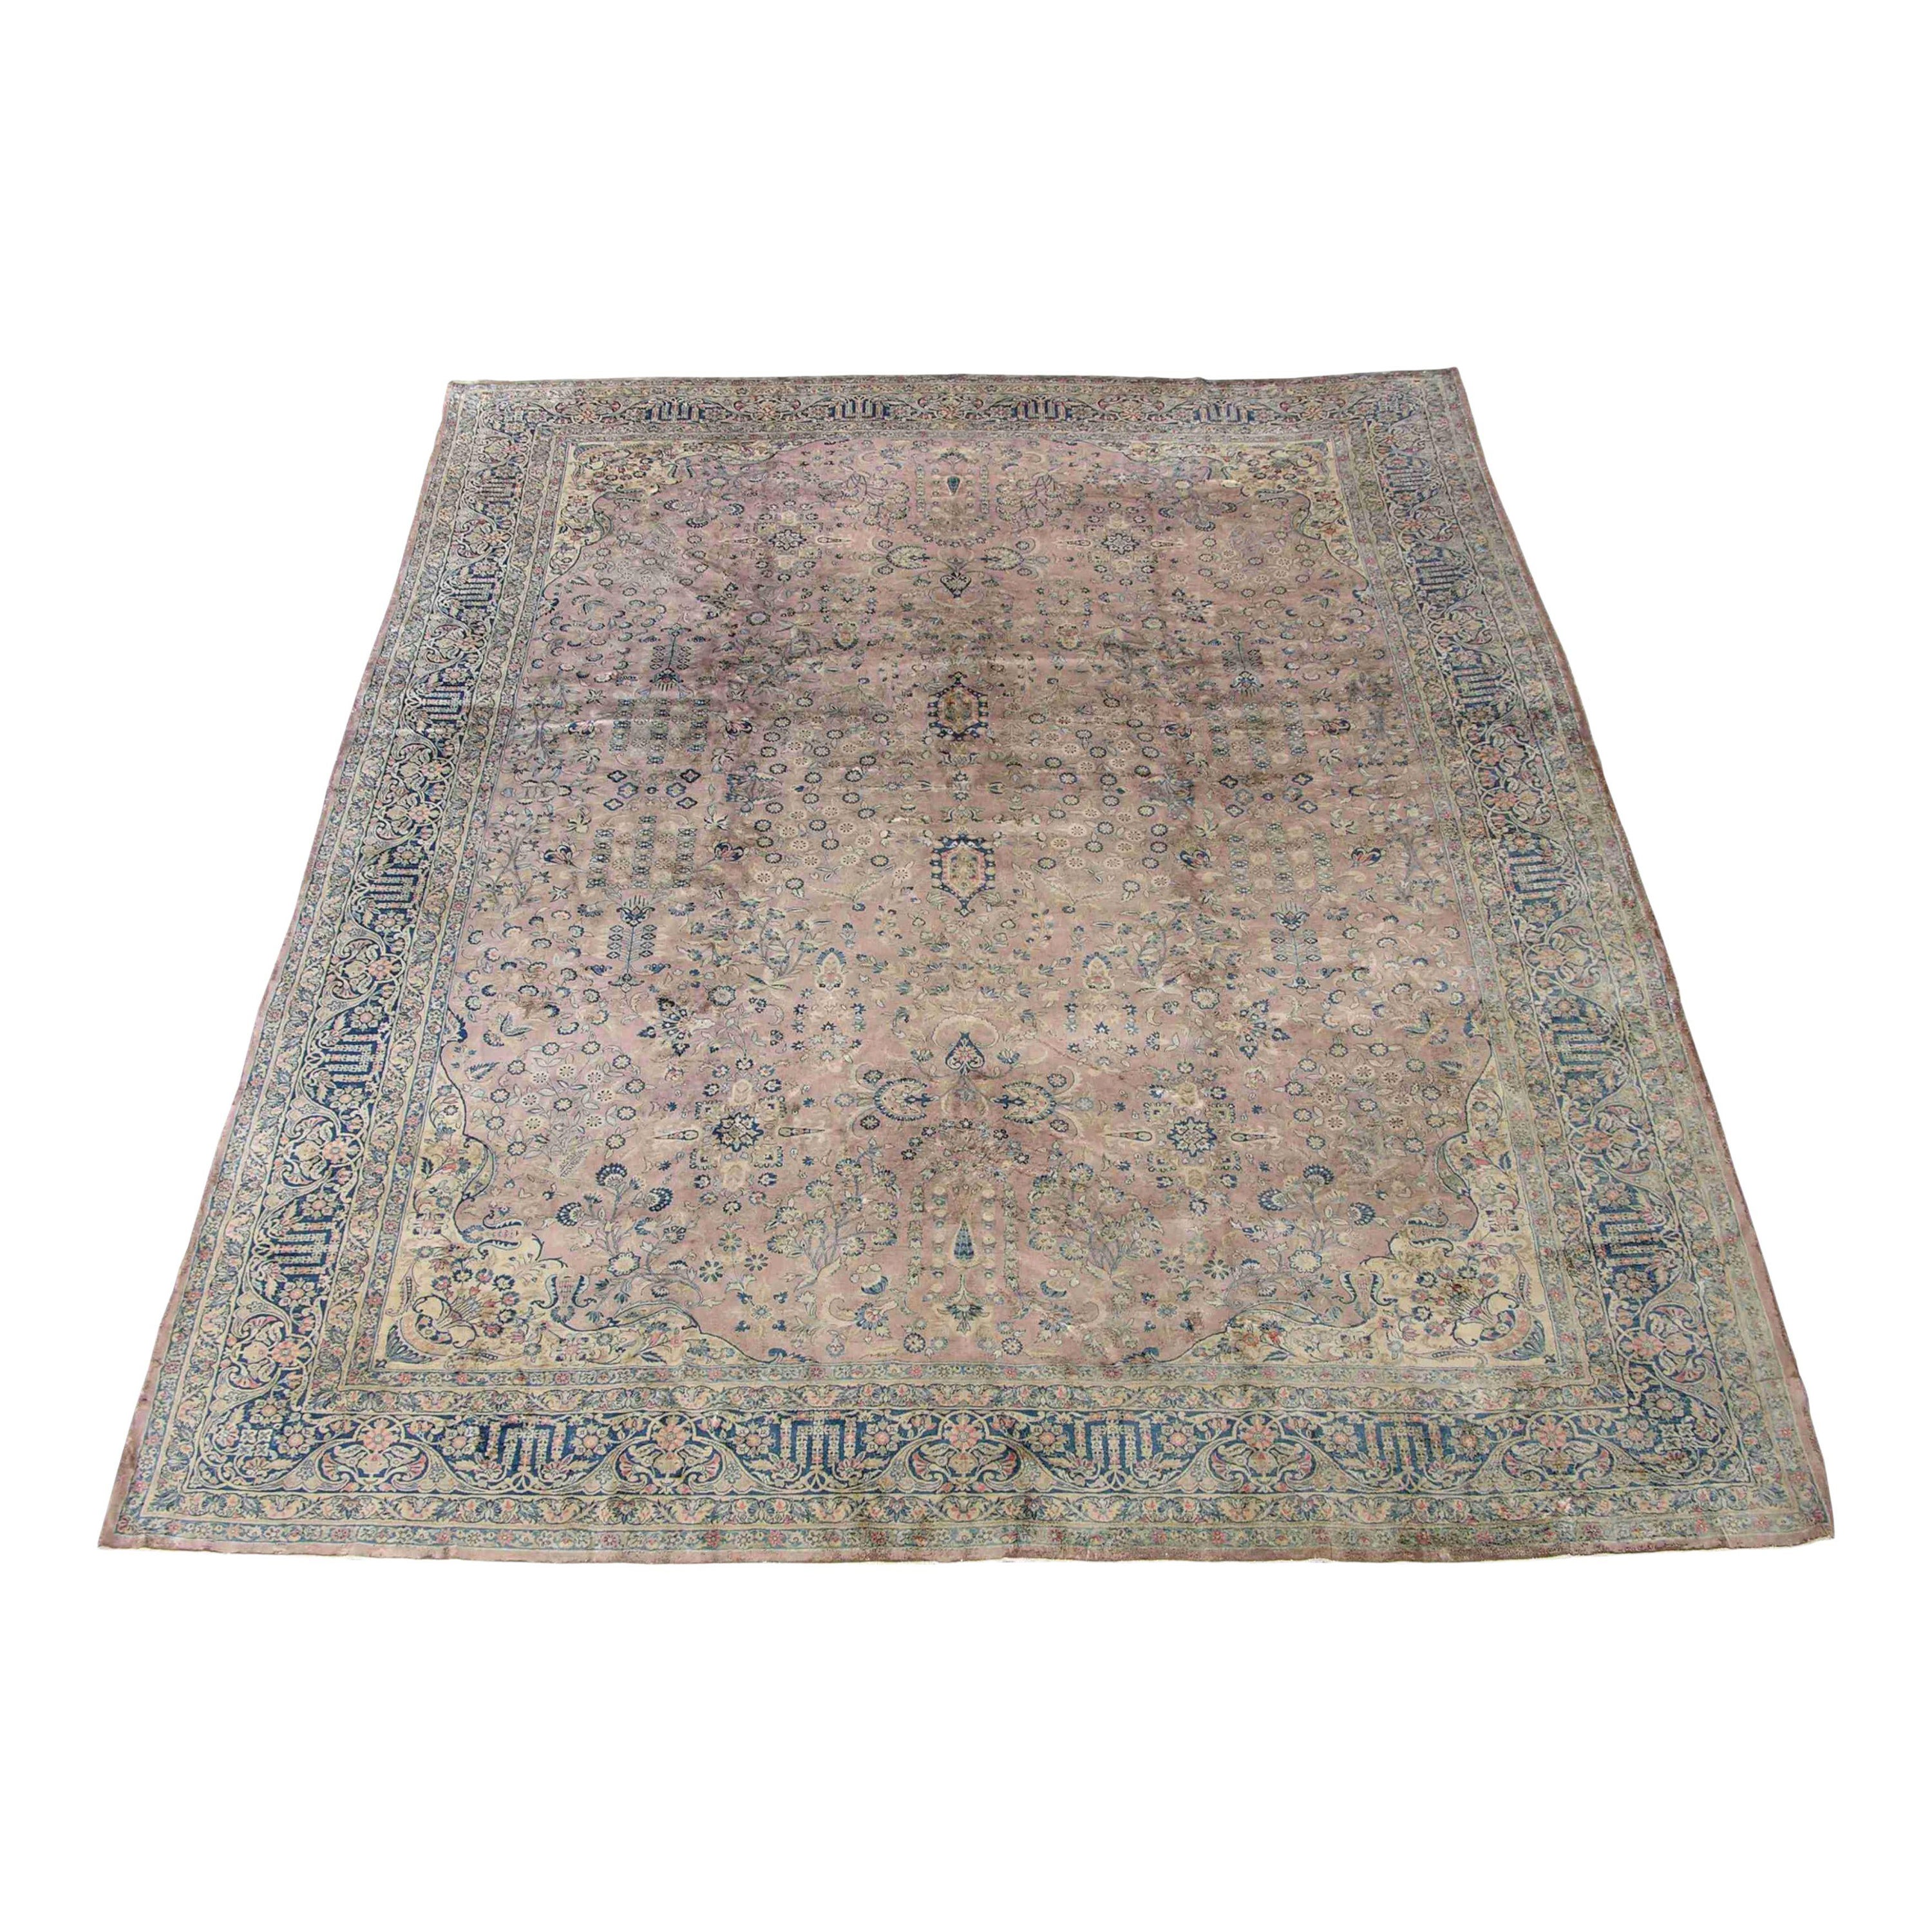 Early 20th Century Antique Persian Kashan Mohtasham Rug For Sale